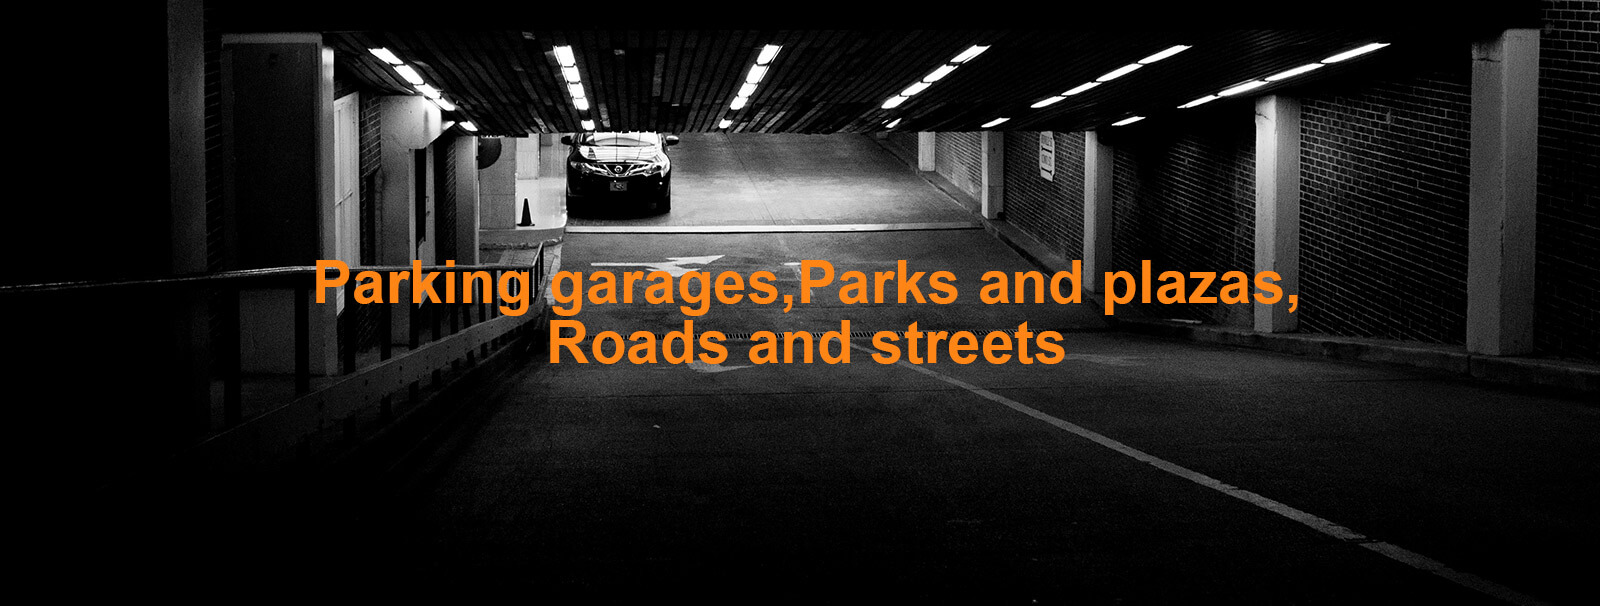 Parking garages,Parks and plazas,Roads and streets - Flood Light